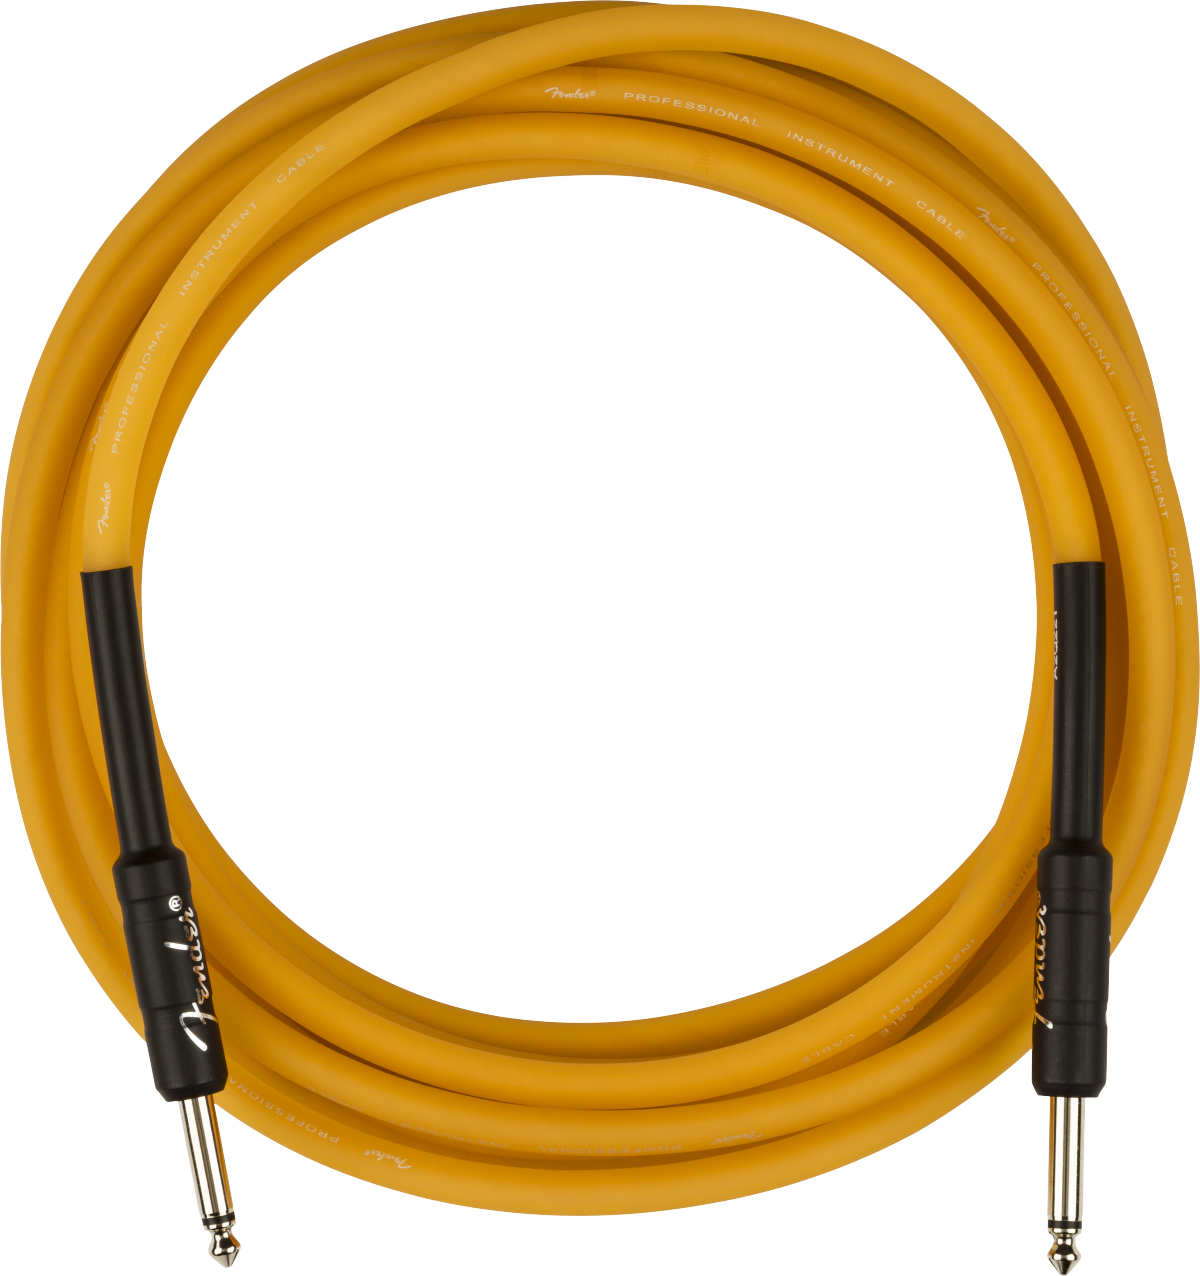 Fender Pro Glow In The Dark Instrument Cable Droit/droit 18.6ft Orange - Cable - Main picture